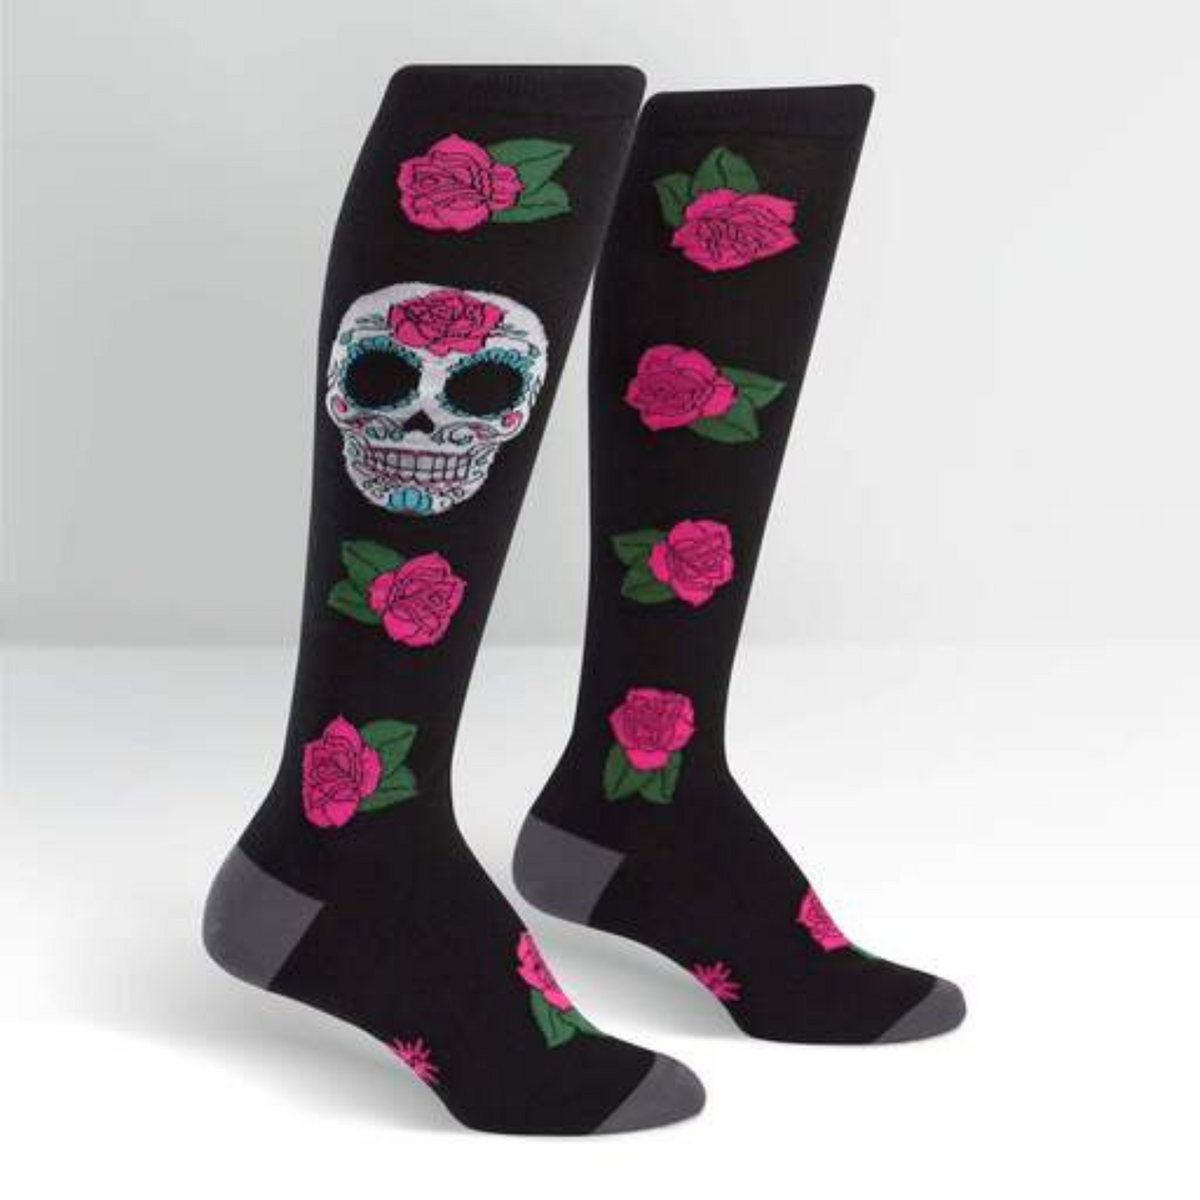 Sock It To Me Sugar Skull women&#39;s knee high sock featuring black sock with red roses all over and large Day of the Dead Sugar Skull. Socks shown on display feet. 